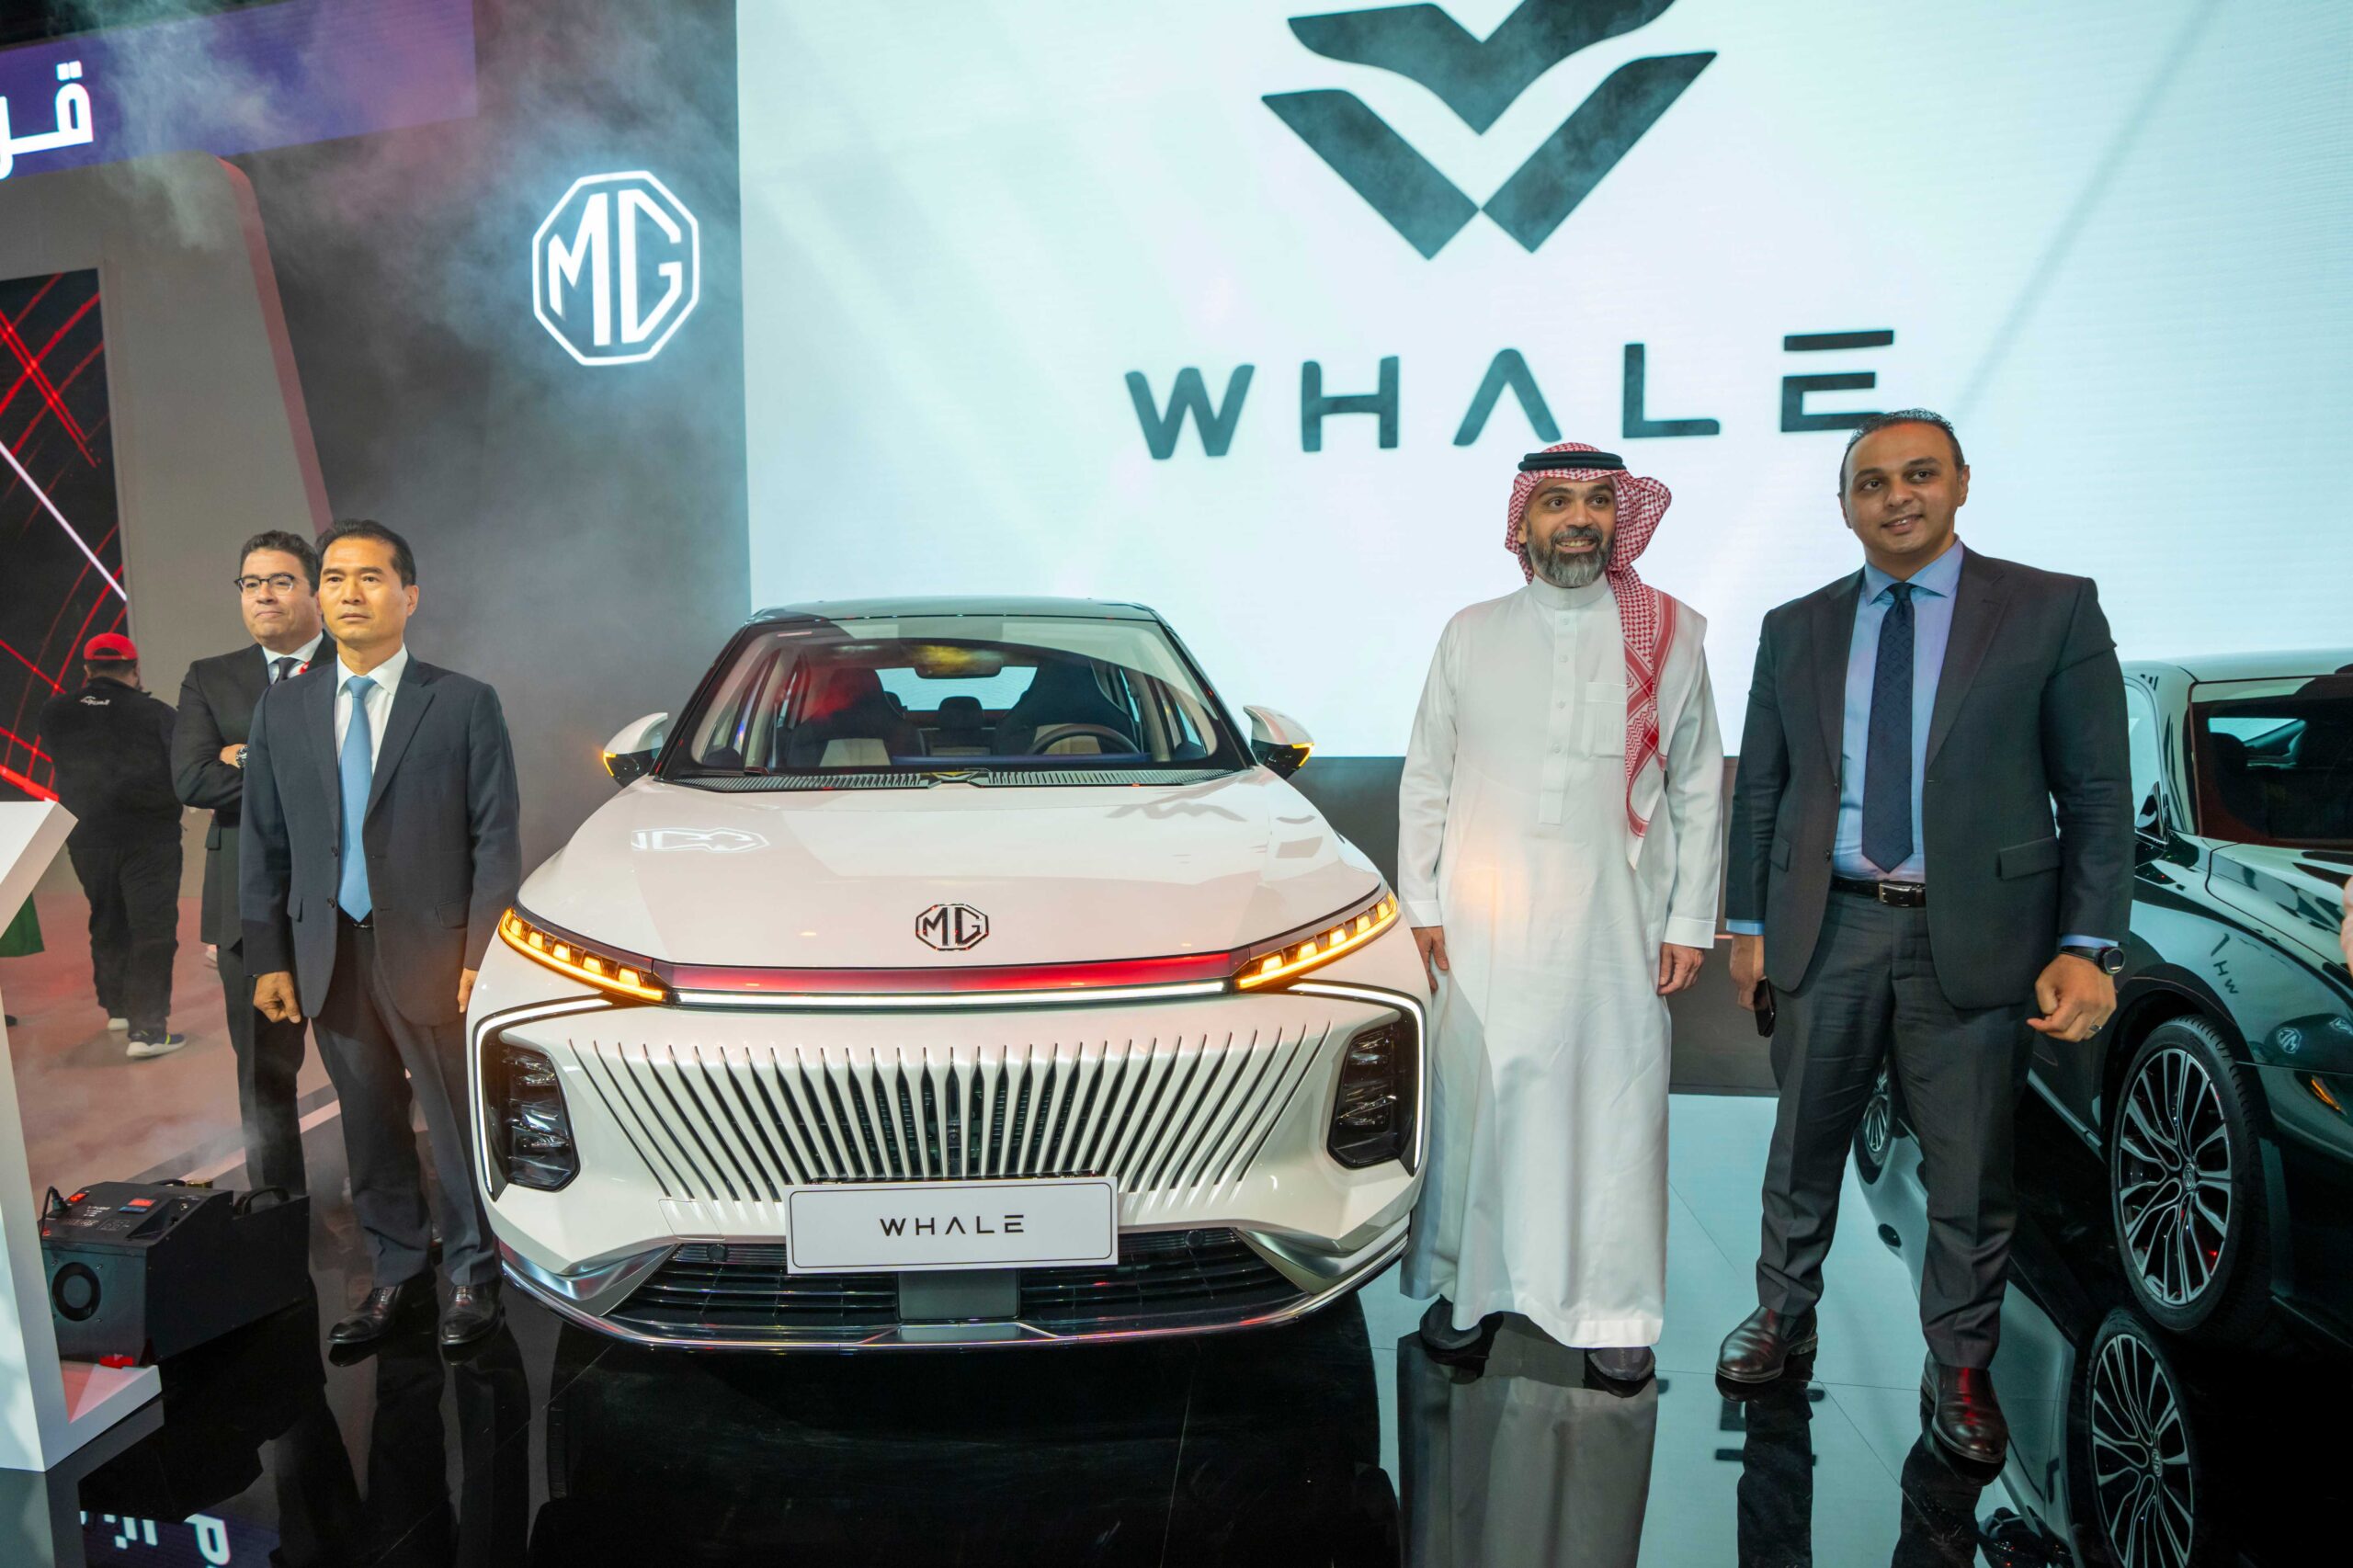 MG MOTOR TAKES CENTRE STAGE AT RIYADH MOTOR SHOW WITH GLOBAL PREMIERE OF MG WHALE AND REGIONAL DEBUT OF MG7